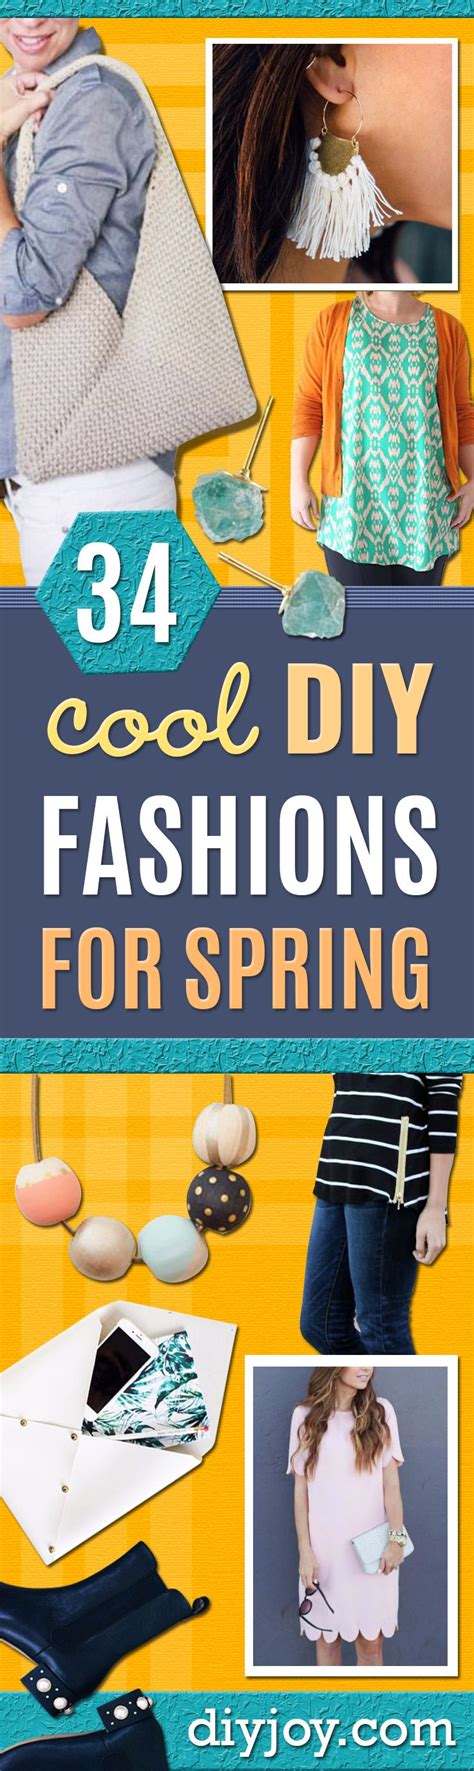 The Cover Of 34 Cool Diy Fashions For Spring With Pictures Of